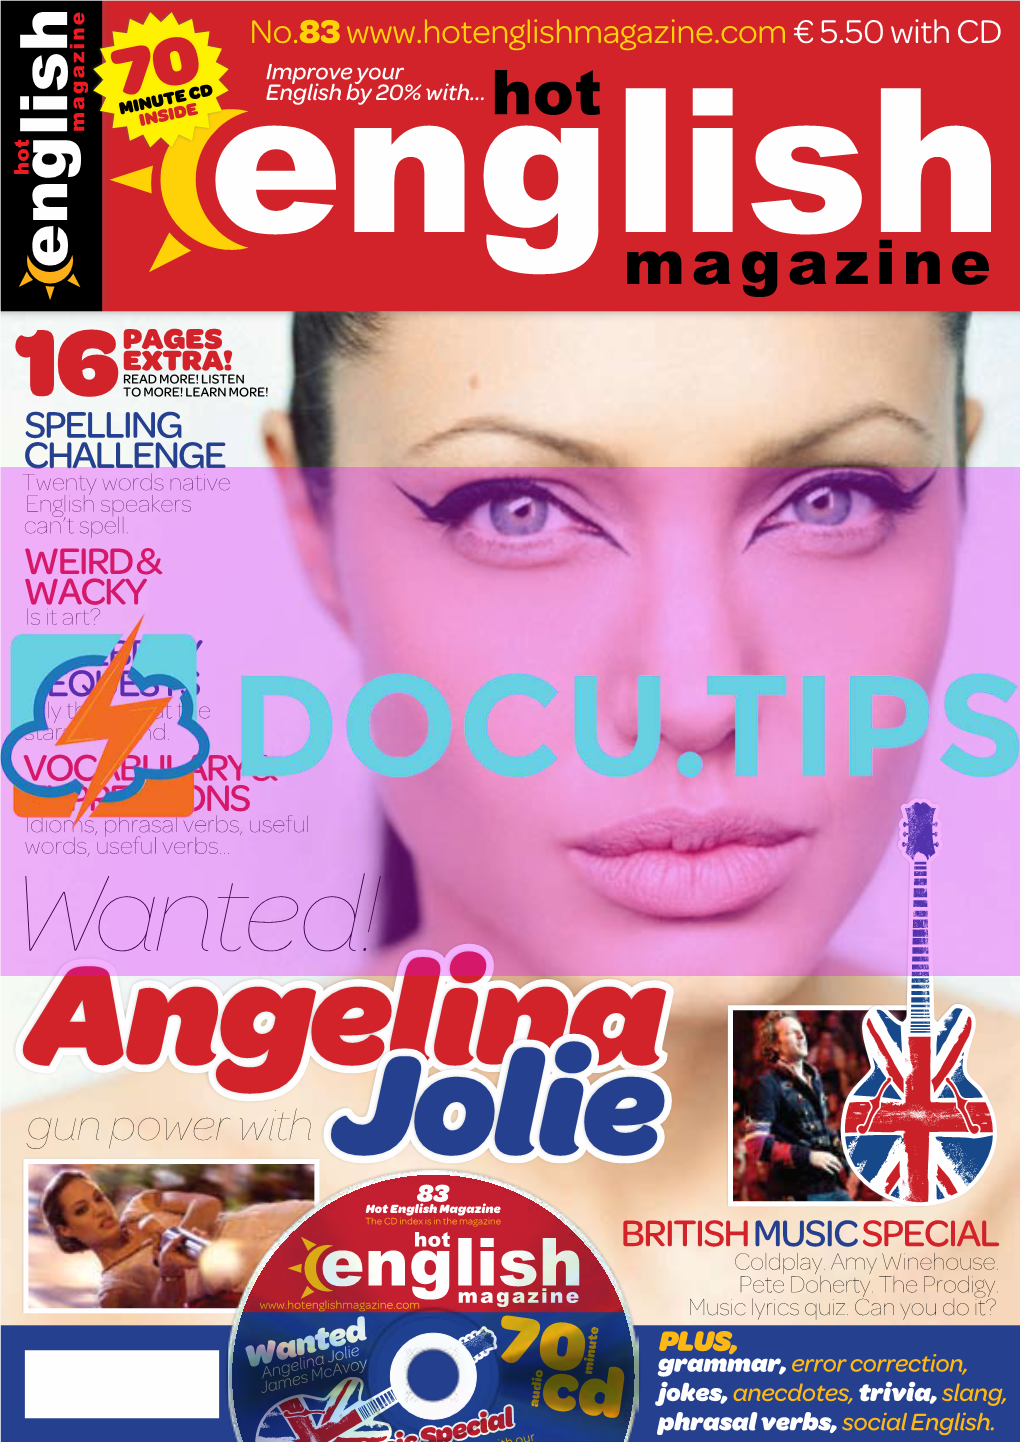 Wanted! Angelina Gun Power with Jolie BRITISH MUSIC SPECIAL Coldplay